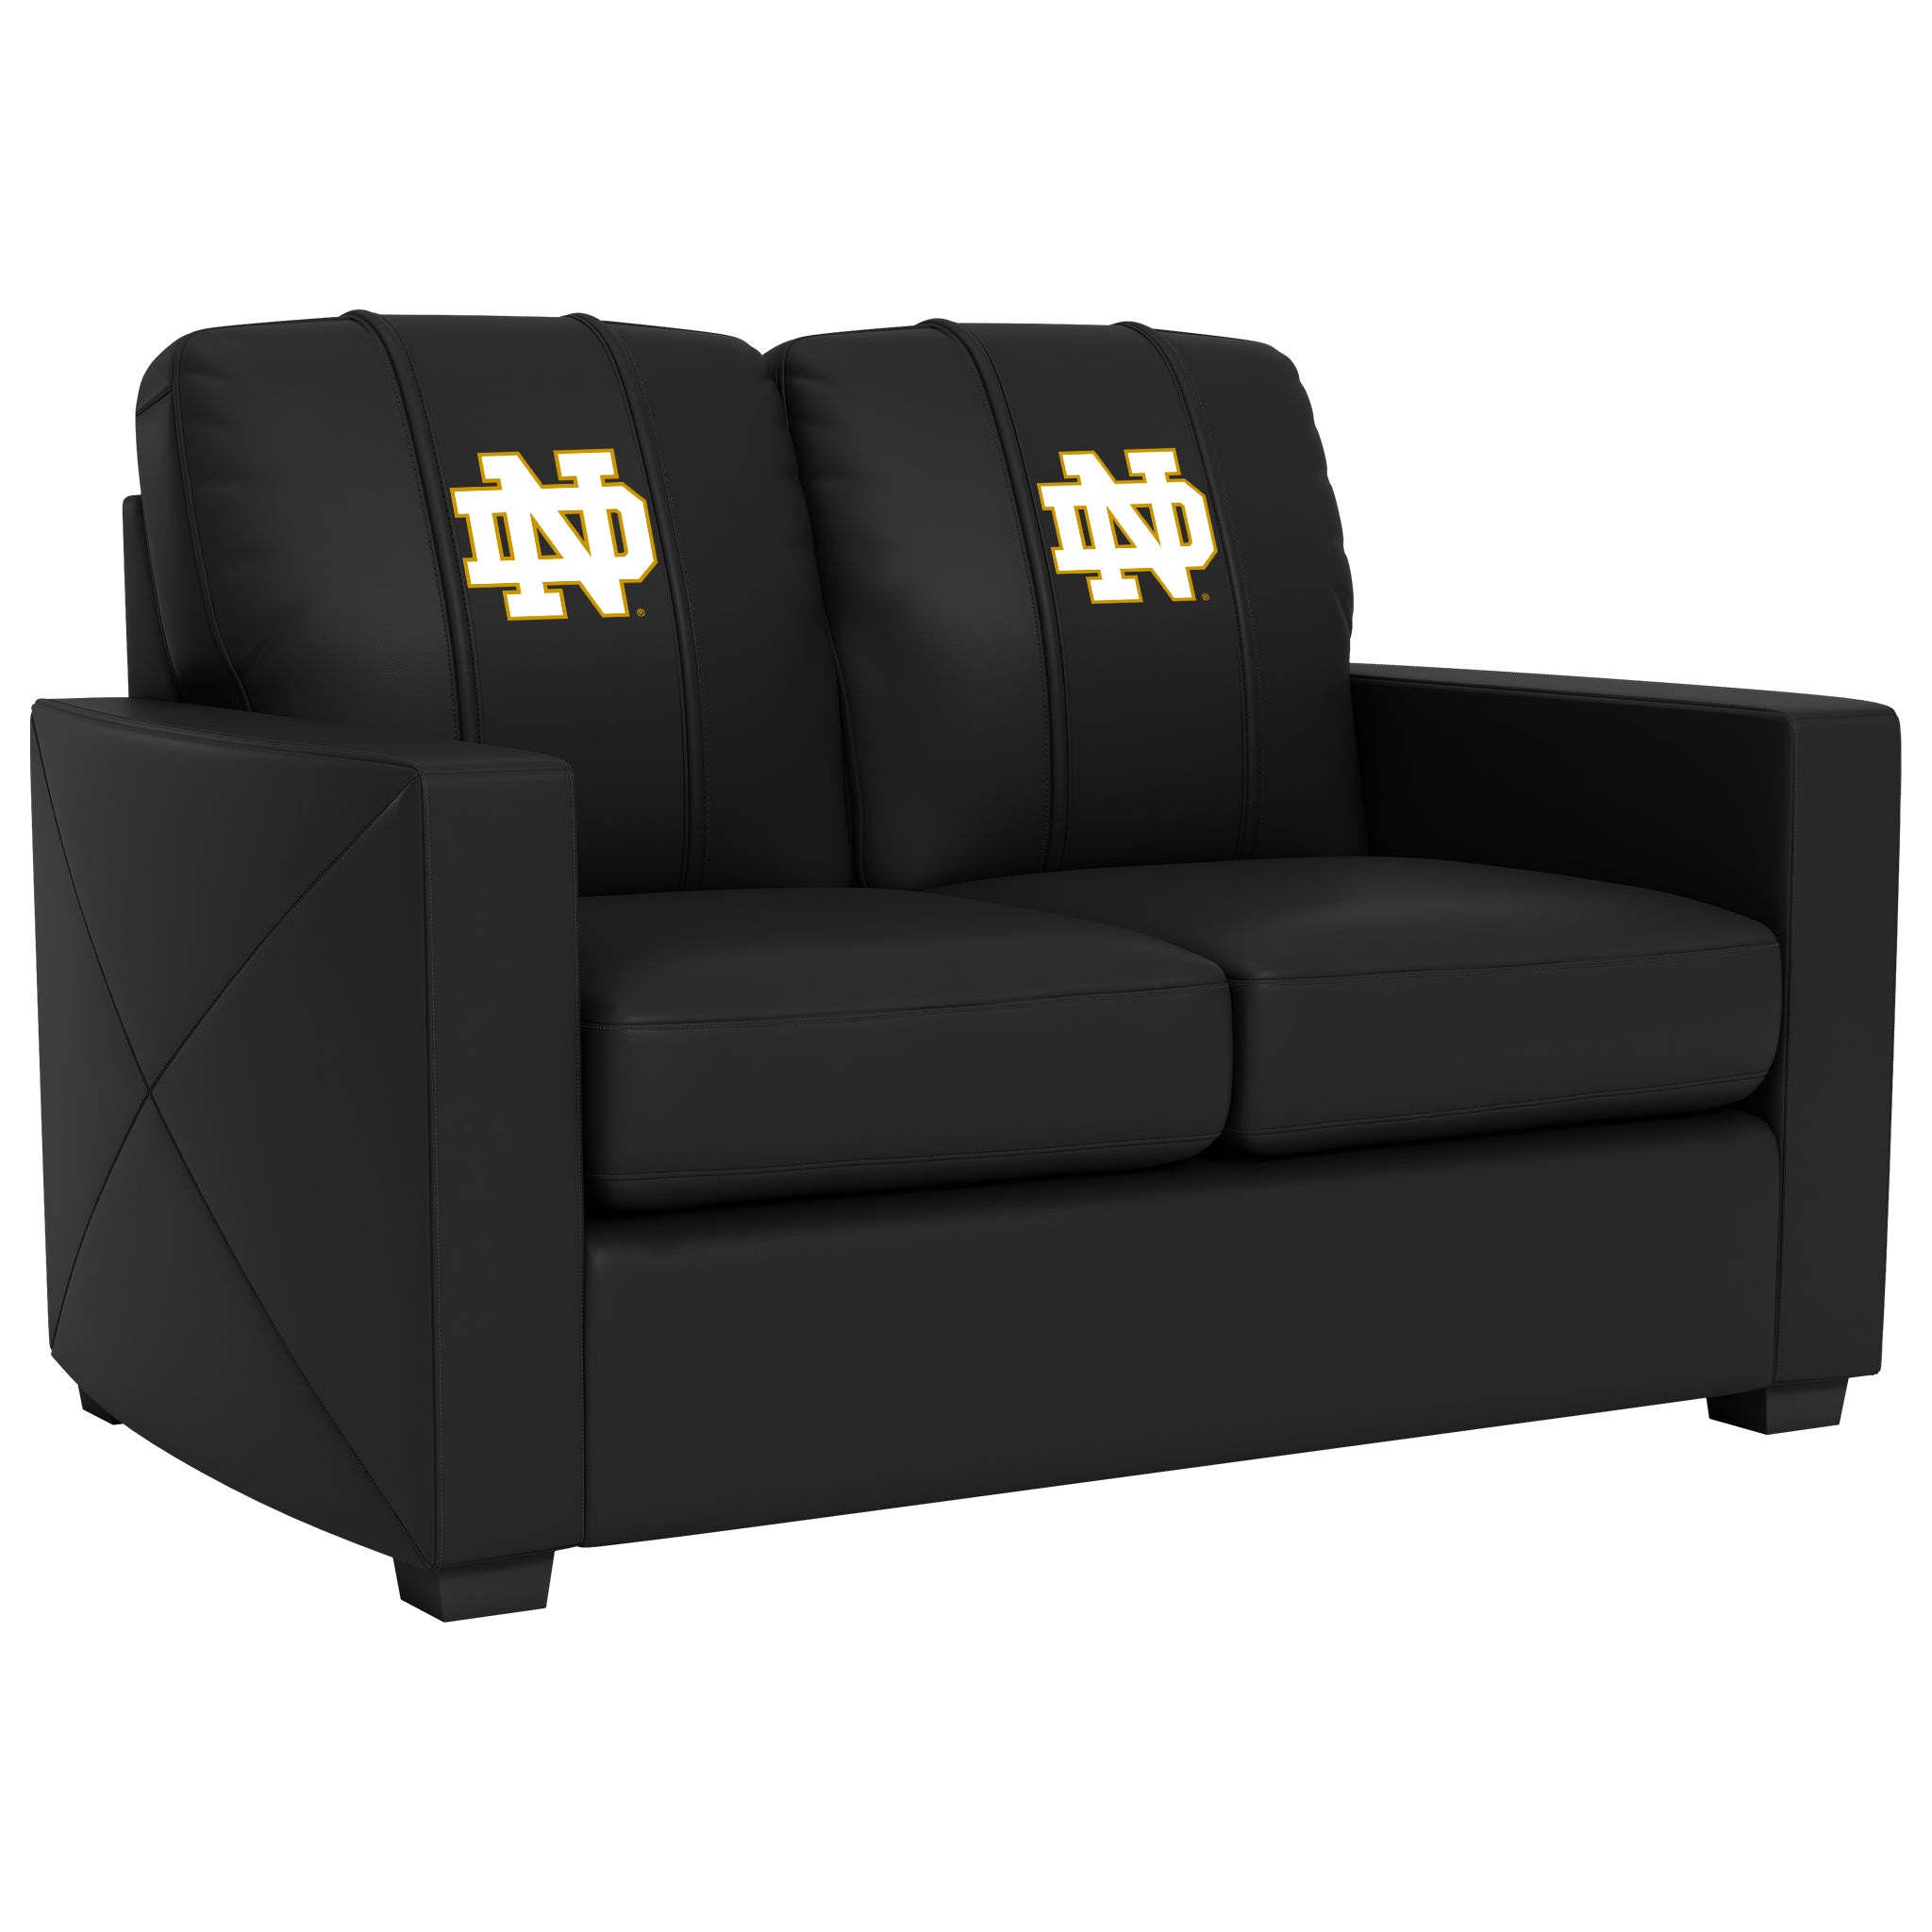 Notre Dame  Silver Loveseat with Notre Dame Secondary Logo